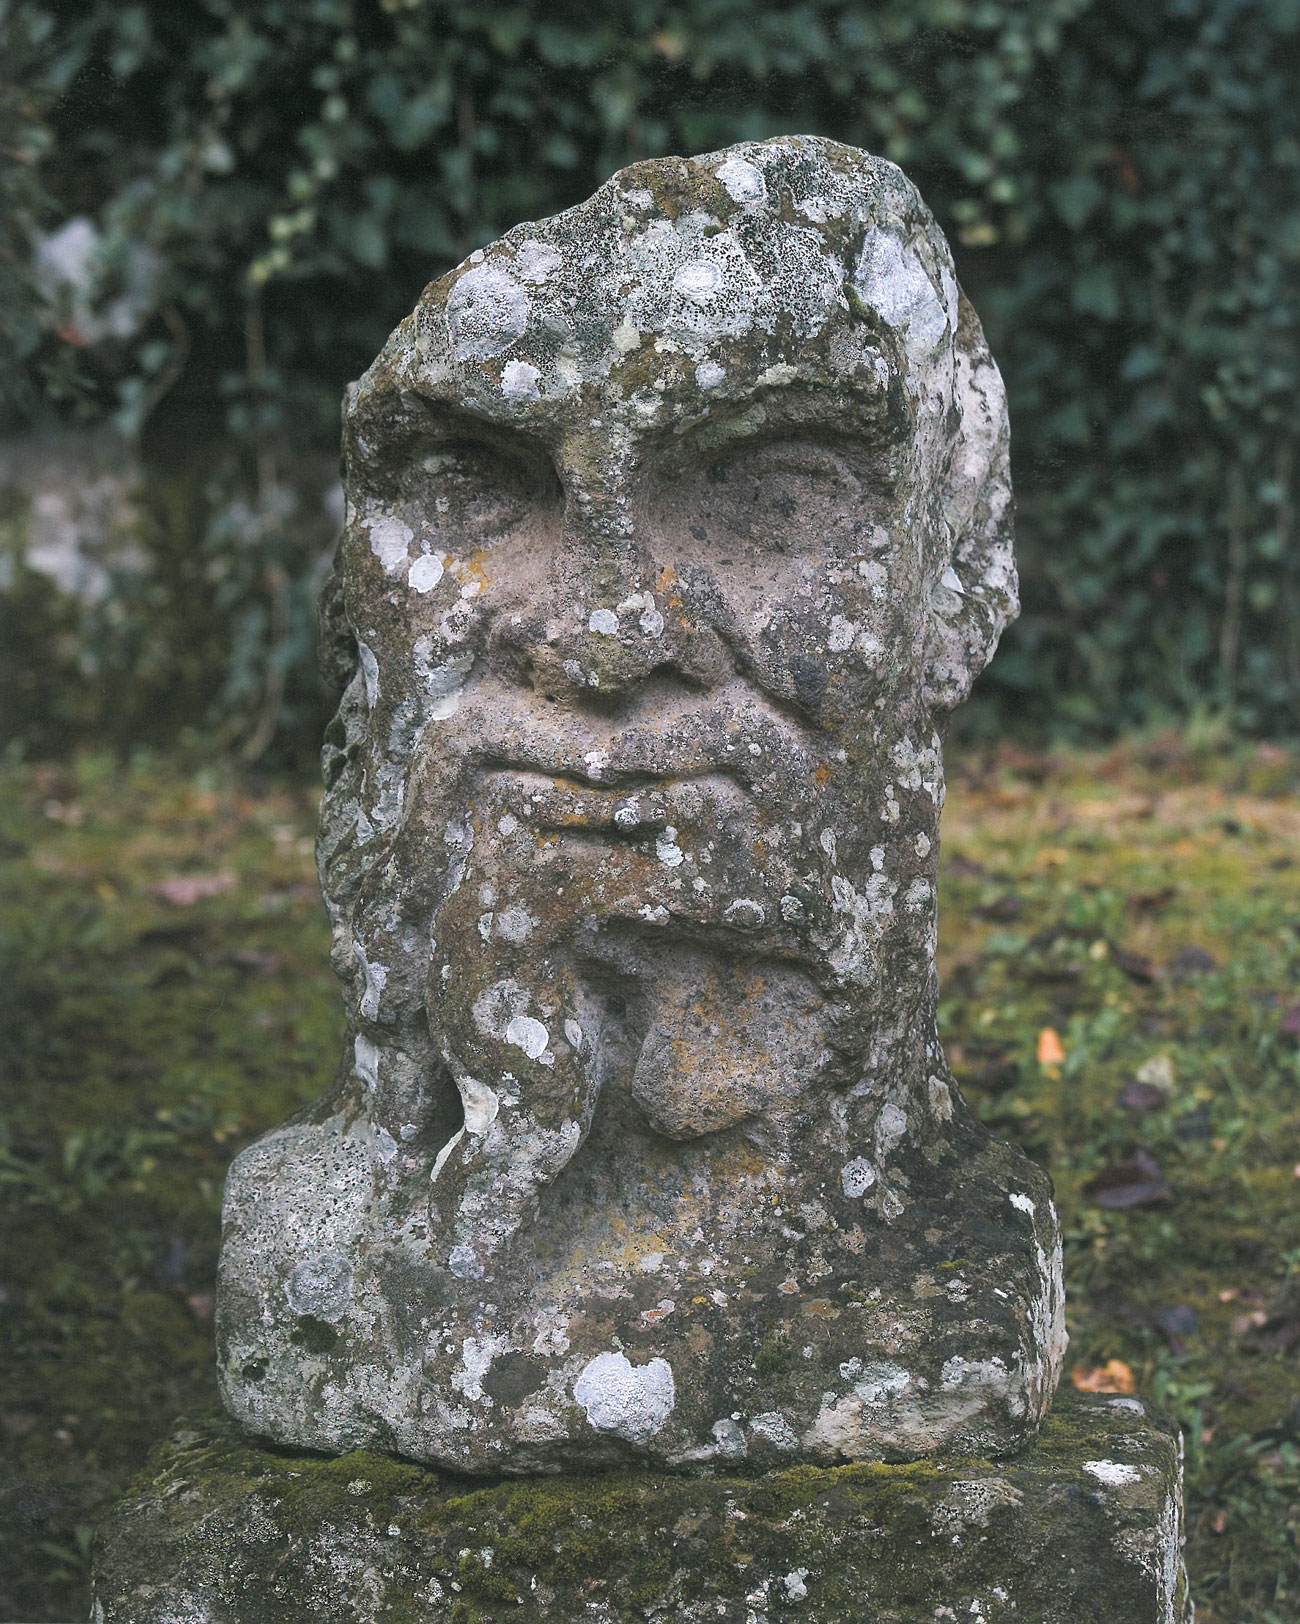 A Herm--adjacent to the Sphinxes. Image courtesy of THE GARDEN AT BOMARZO, by Jessie Sheeler.